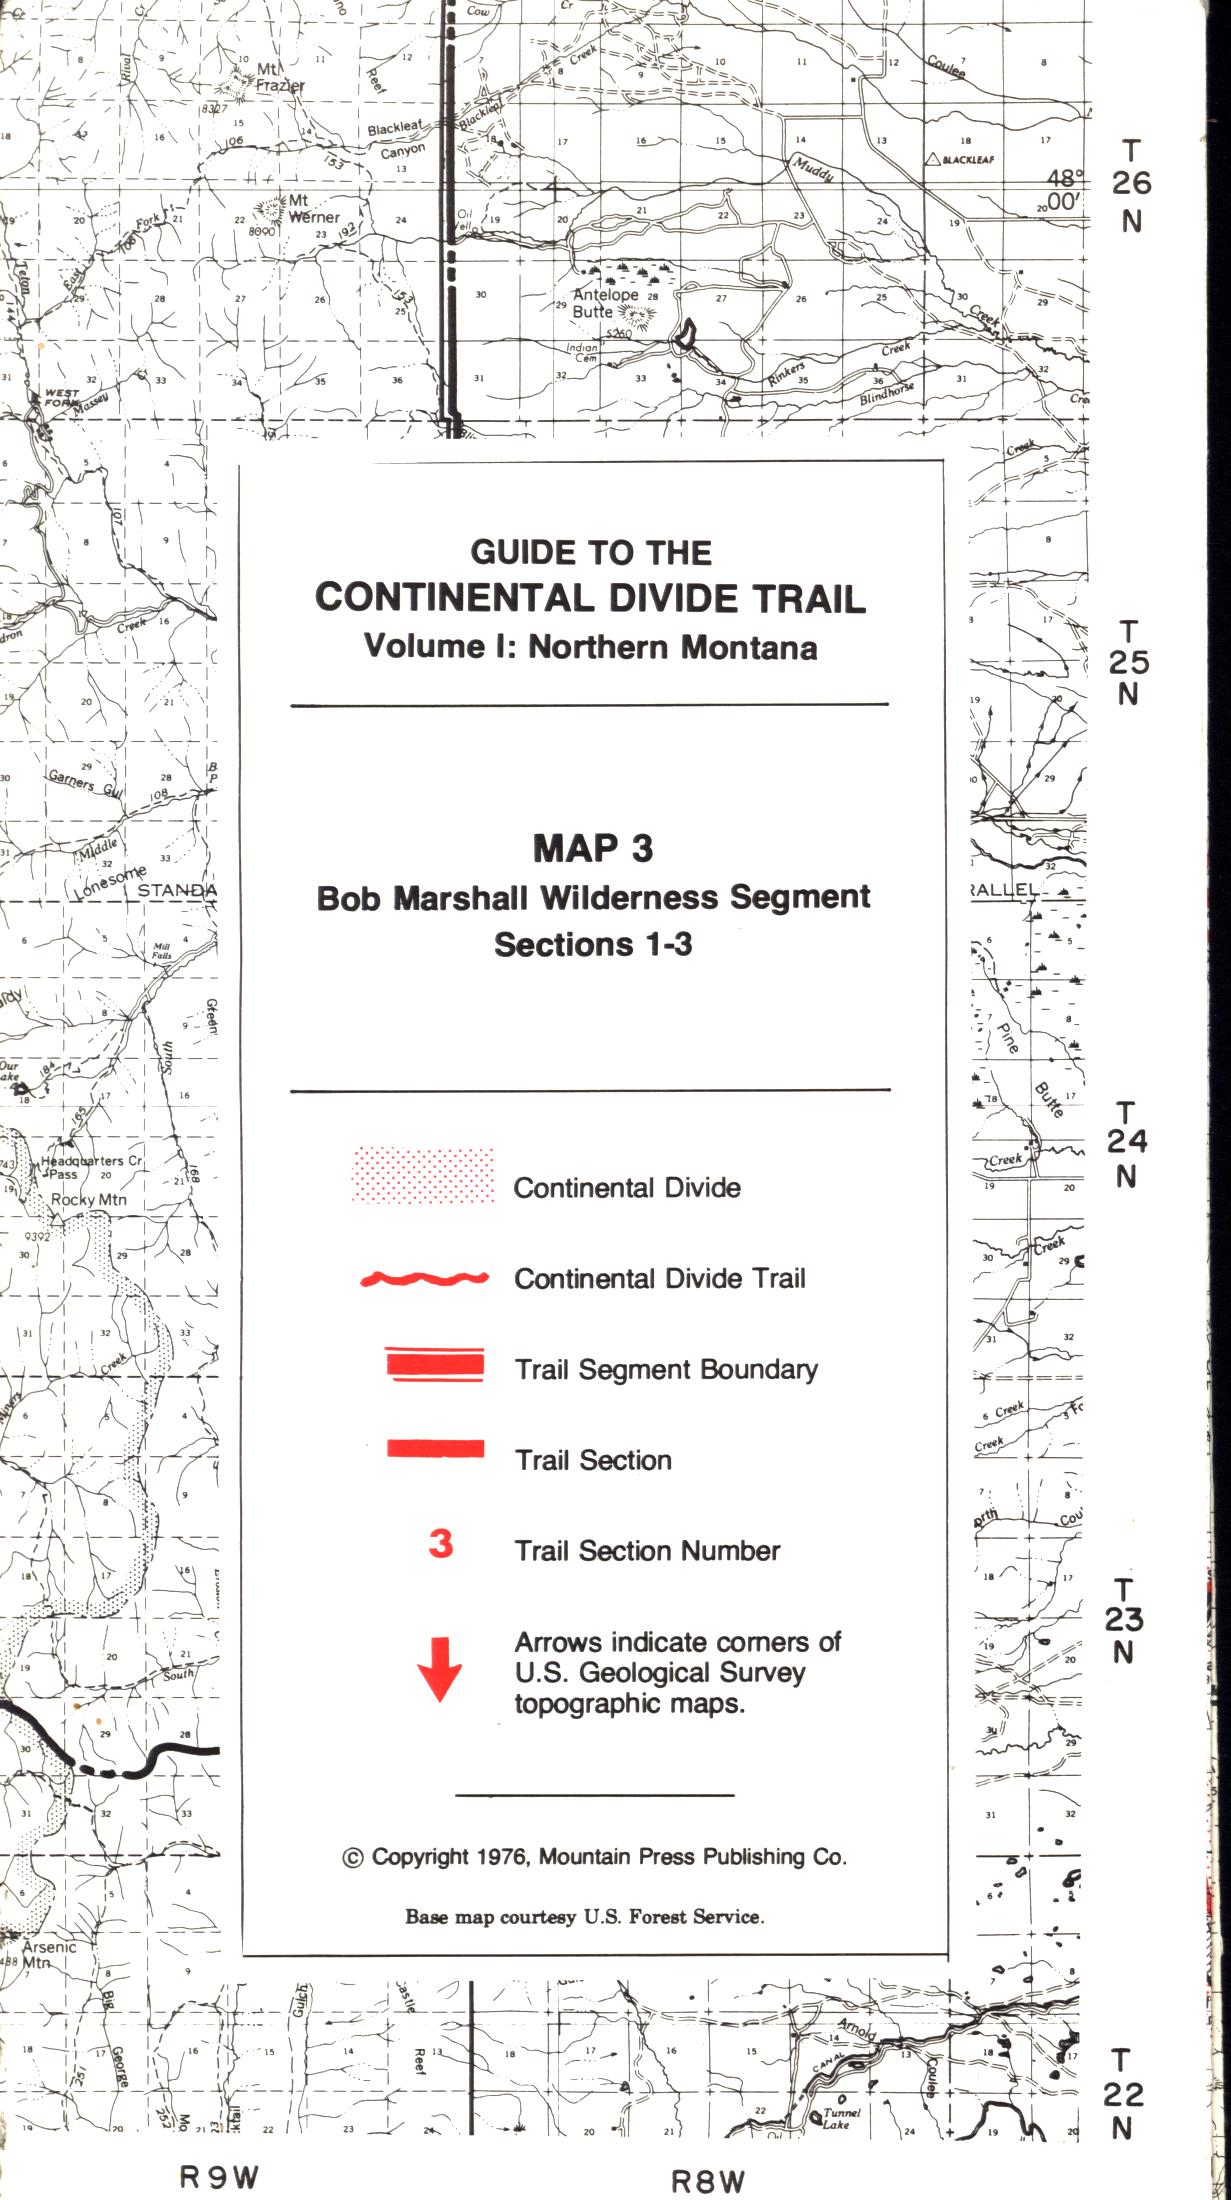 GUIDE TO THE CONTINENTAL DIVIDE TRAIL: Volume I, Northern Montana. 